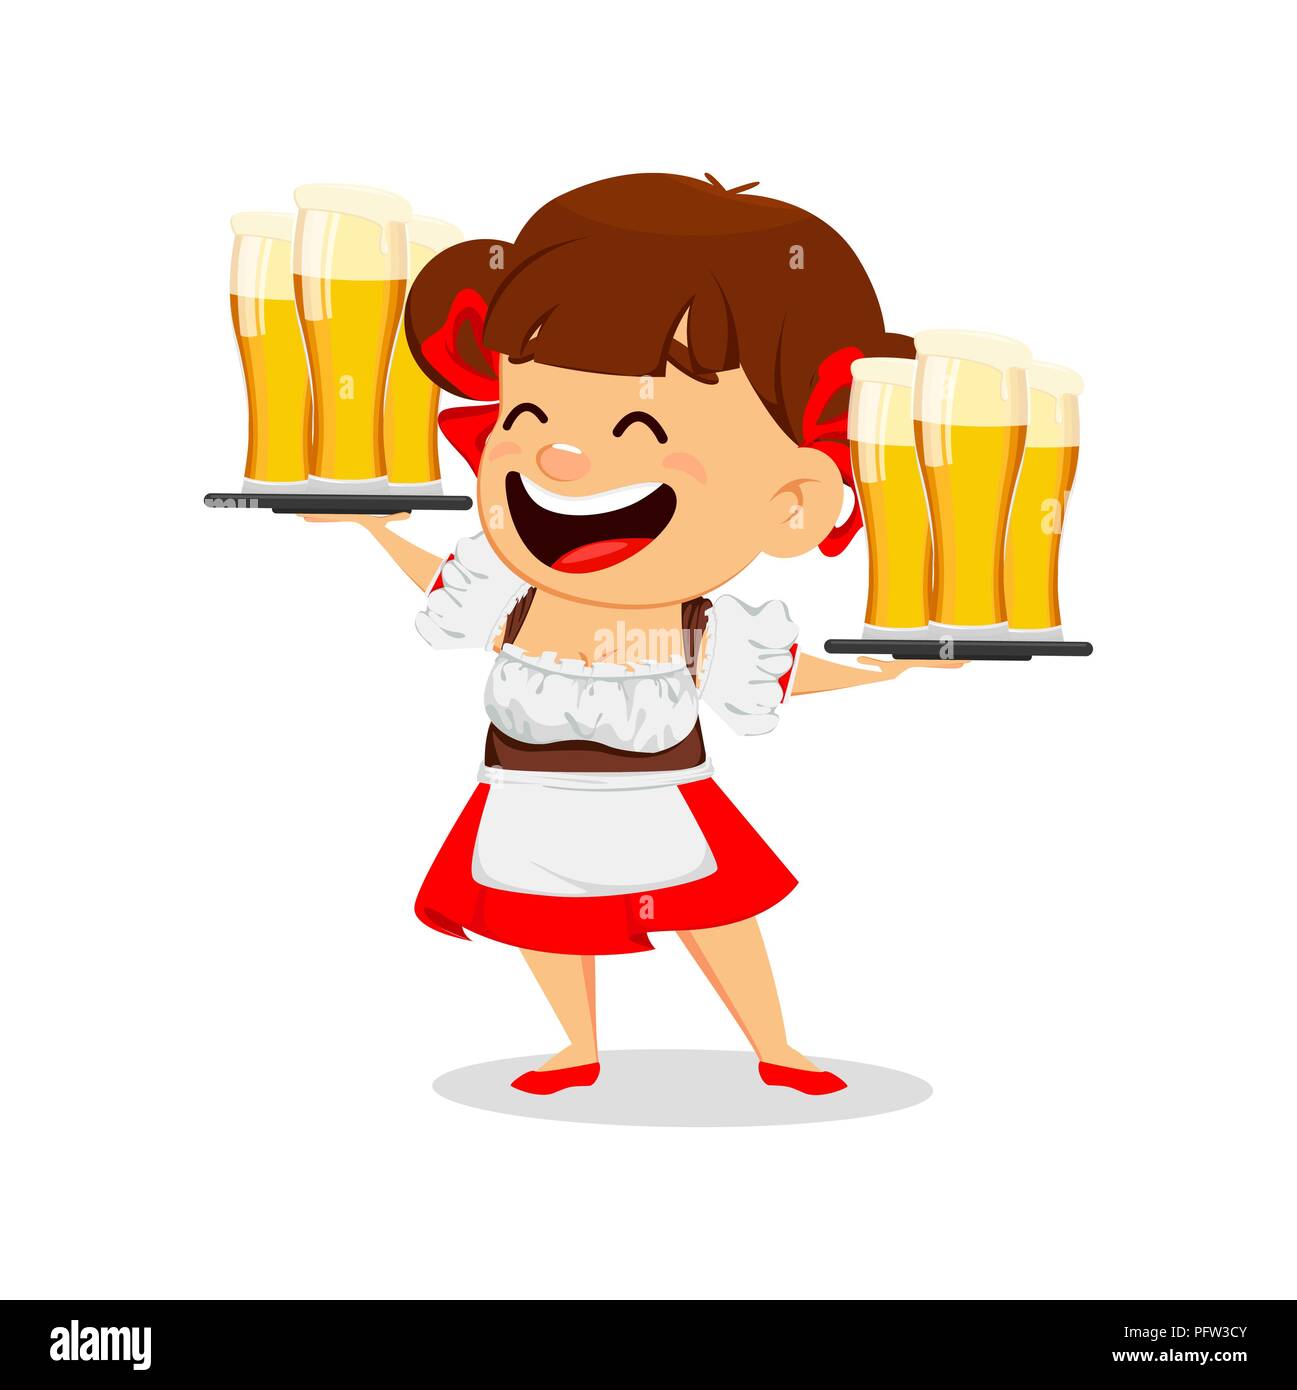 Oktoberfest, beer festival. Funny woman, cheerful cartoon character holding two trays with beer. Vector illustration on white background. Stock Vector